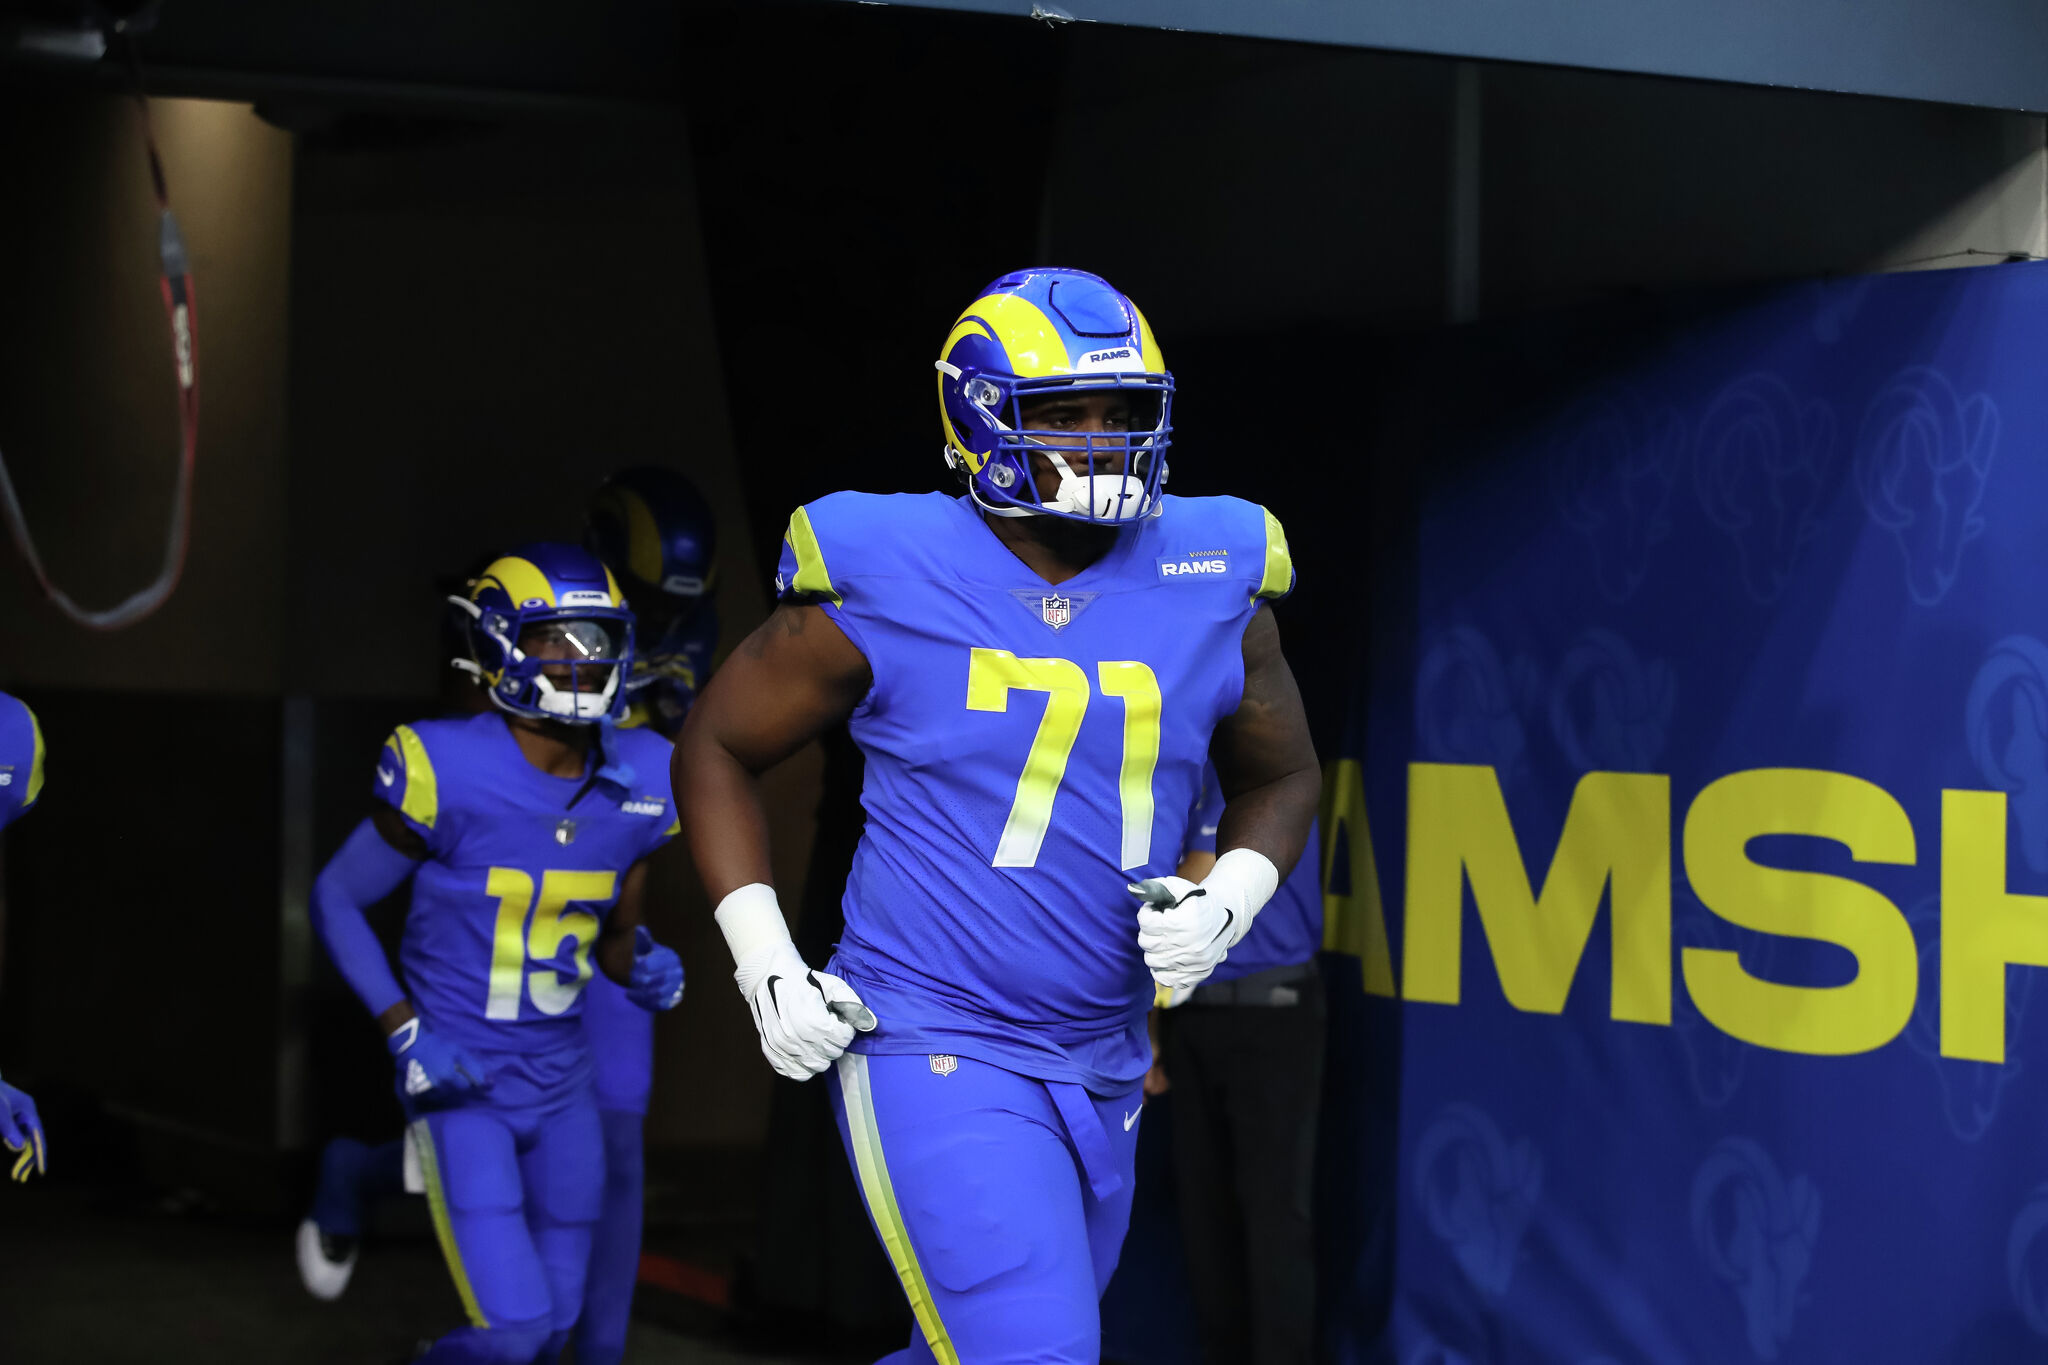 The Rams' Super Bowl throwback uniforms are 71 years old, and